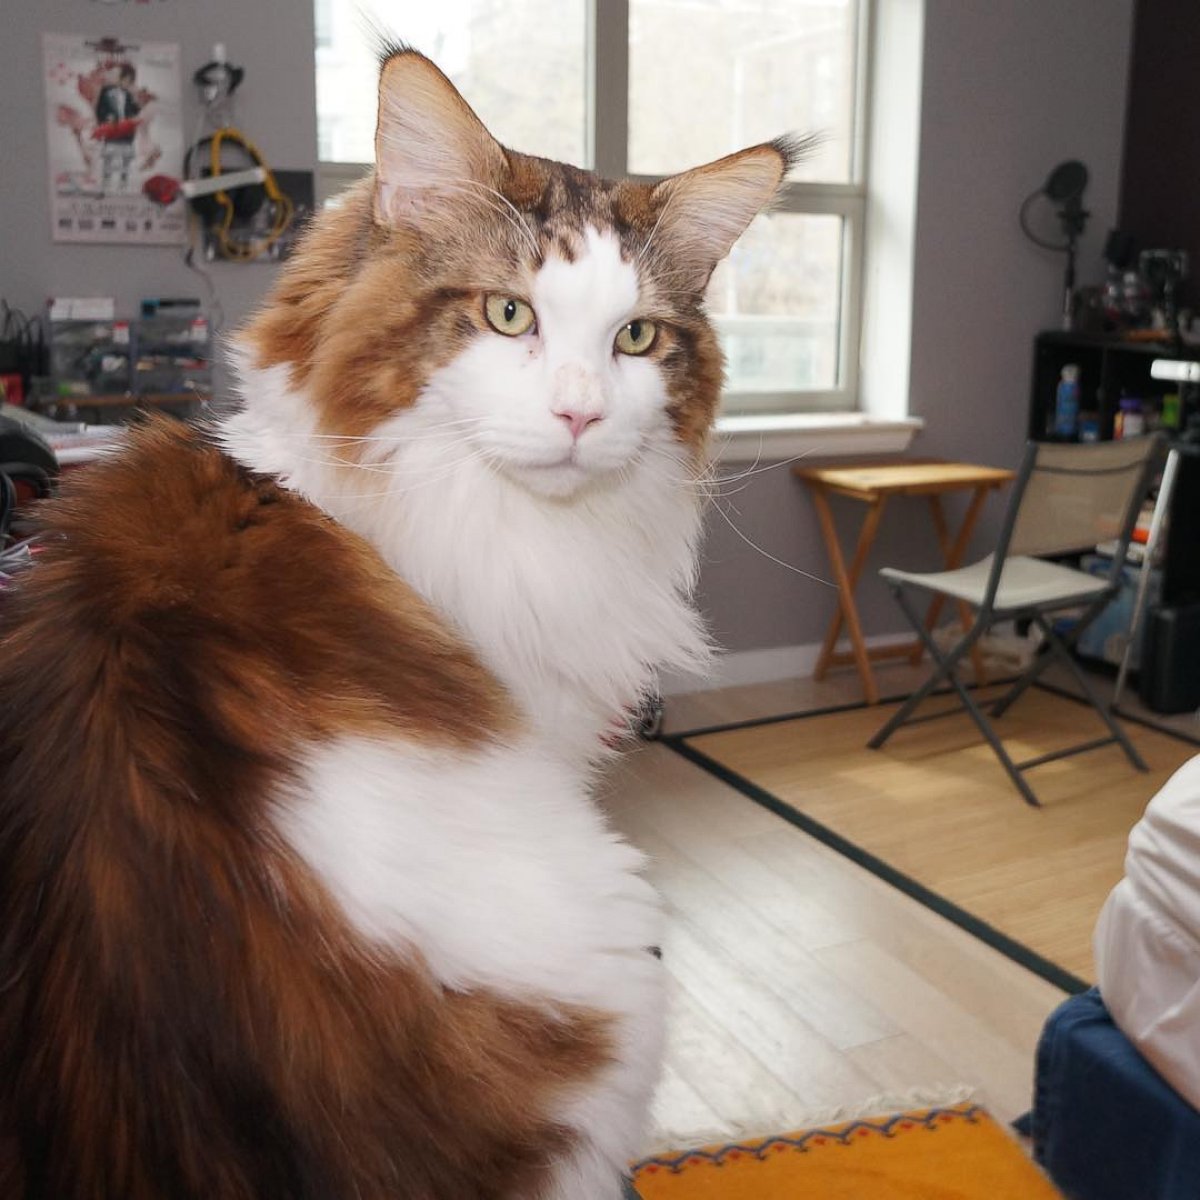 PHOTO: 28-Pound New York City Cat Rivals Bobcat in Size